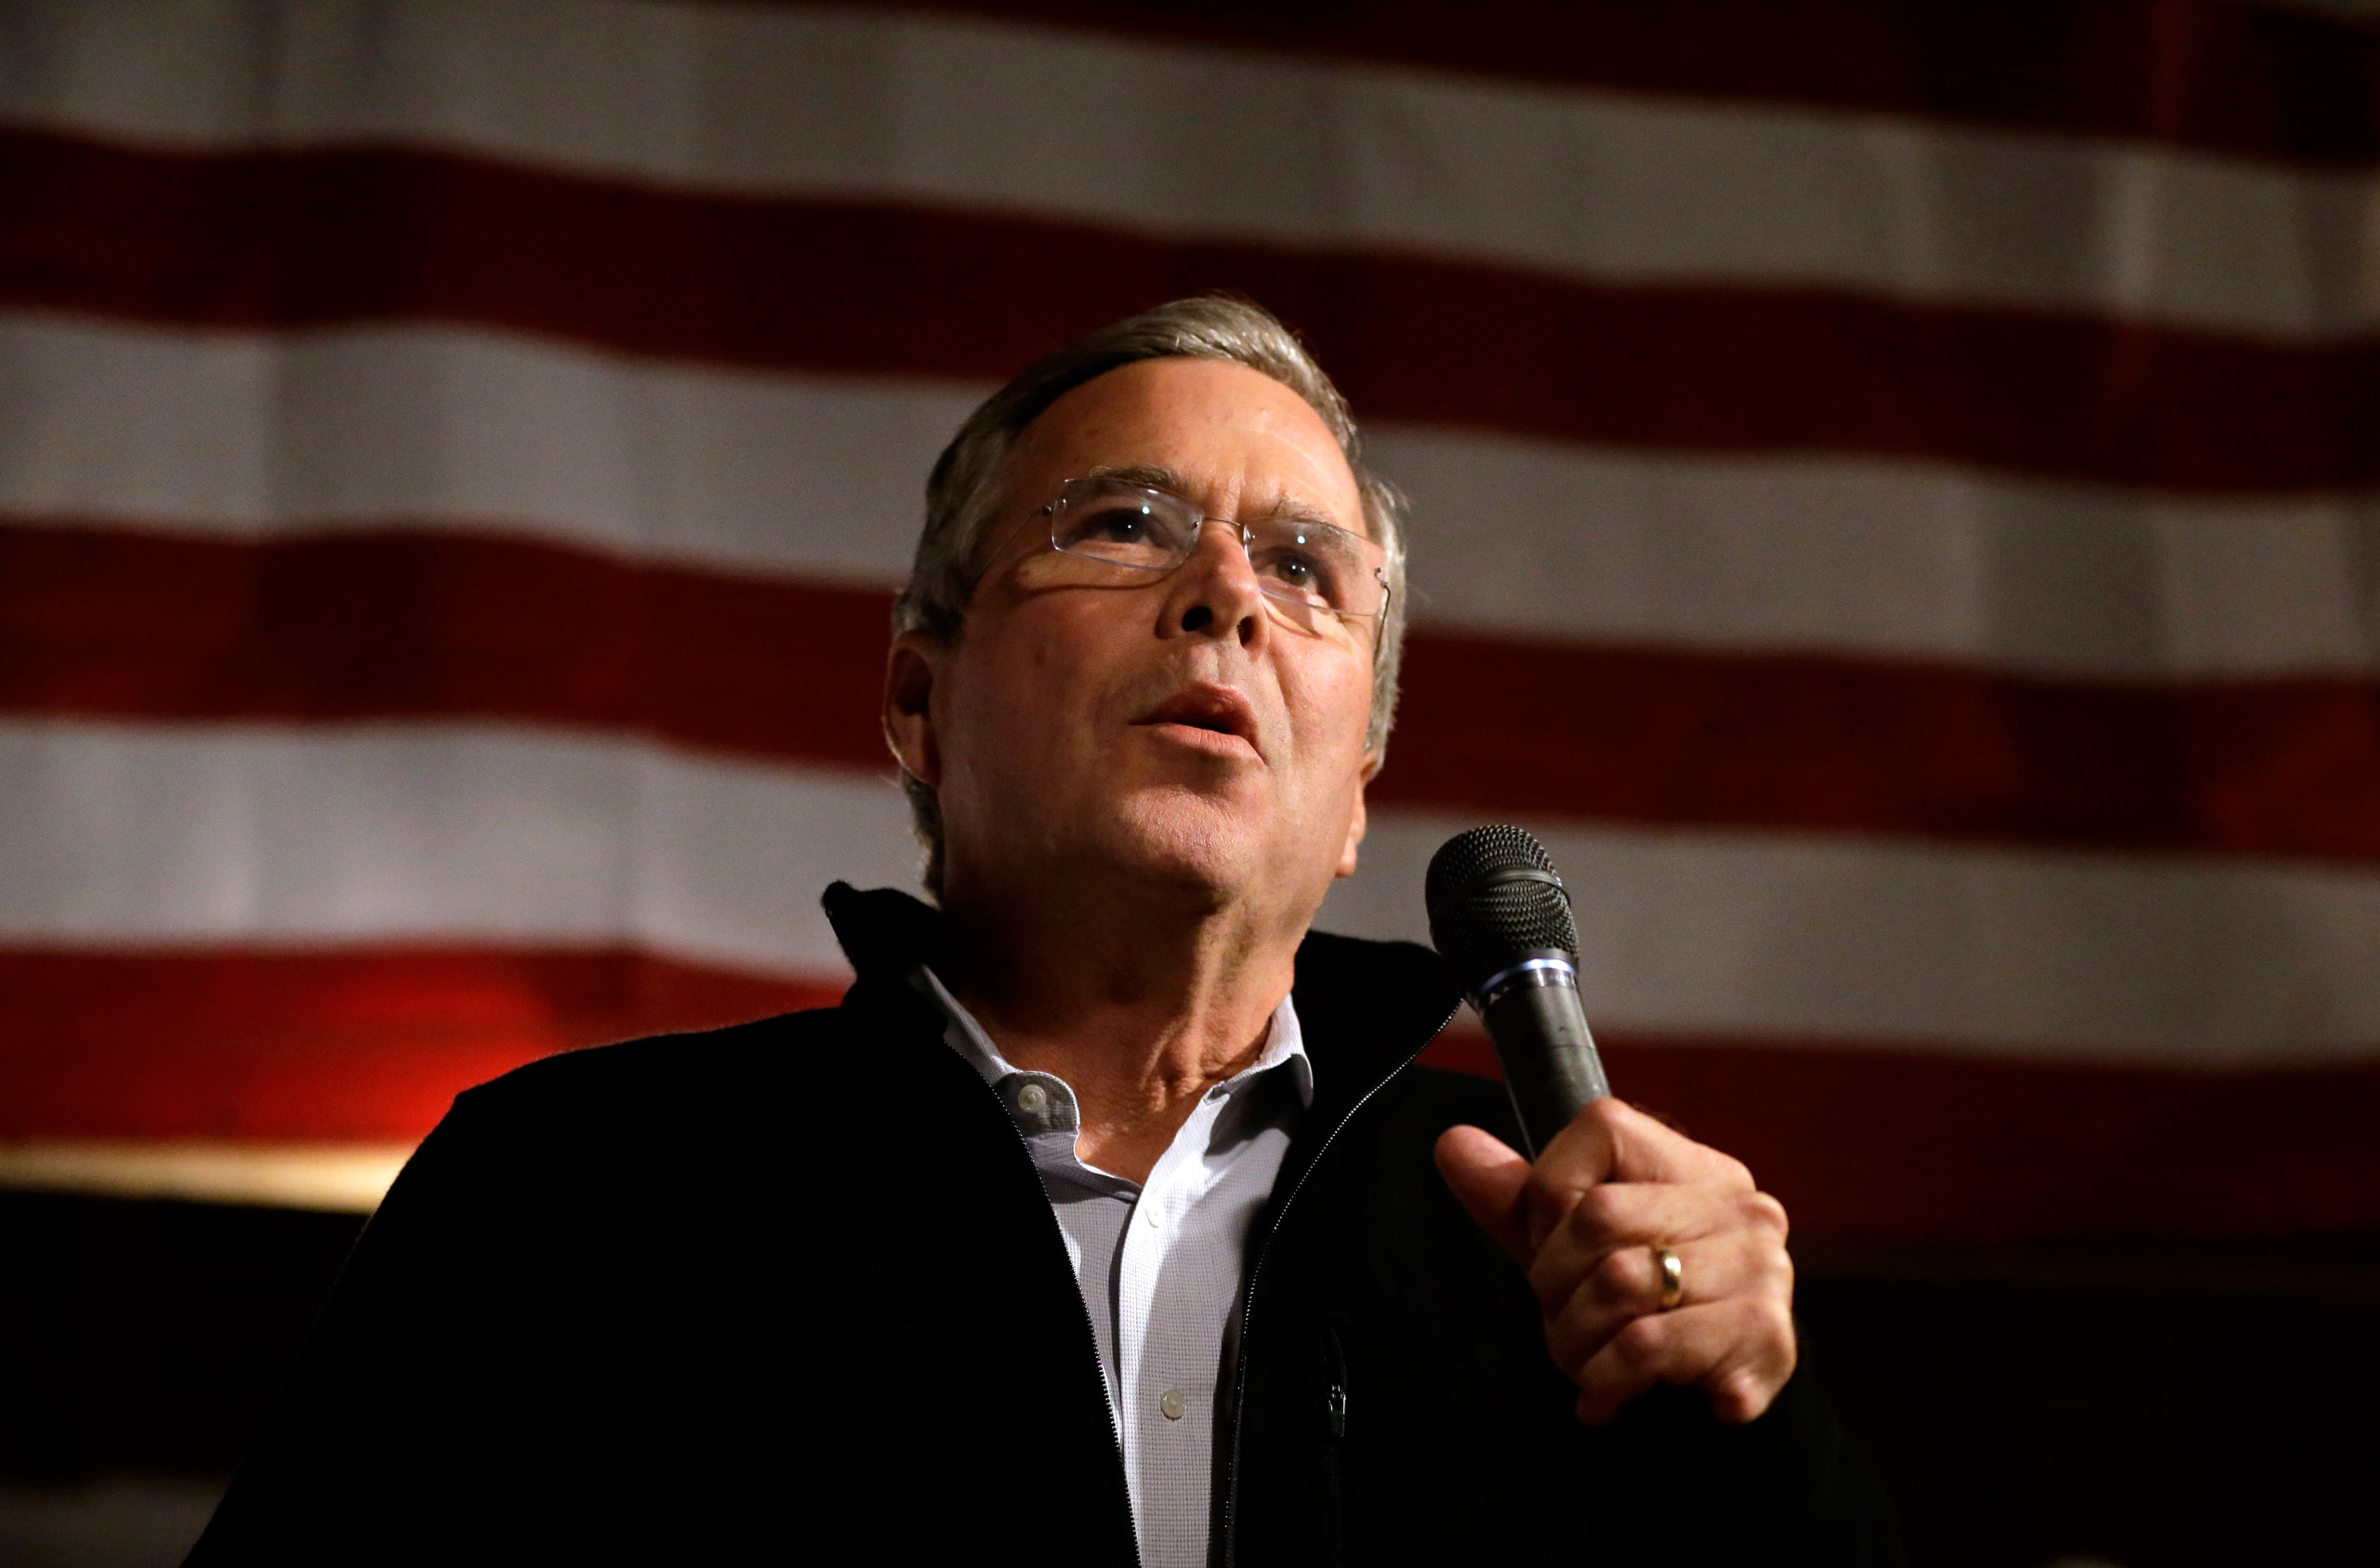 Jeb Bush addresses an audience at a campaign event held in a barn belonging to former Sen. Scott Brown in Rye, N.H., on Nov. 3, 2015. (Steven Senne—AP)